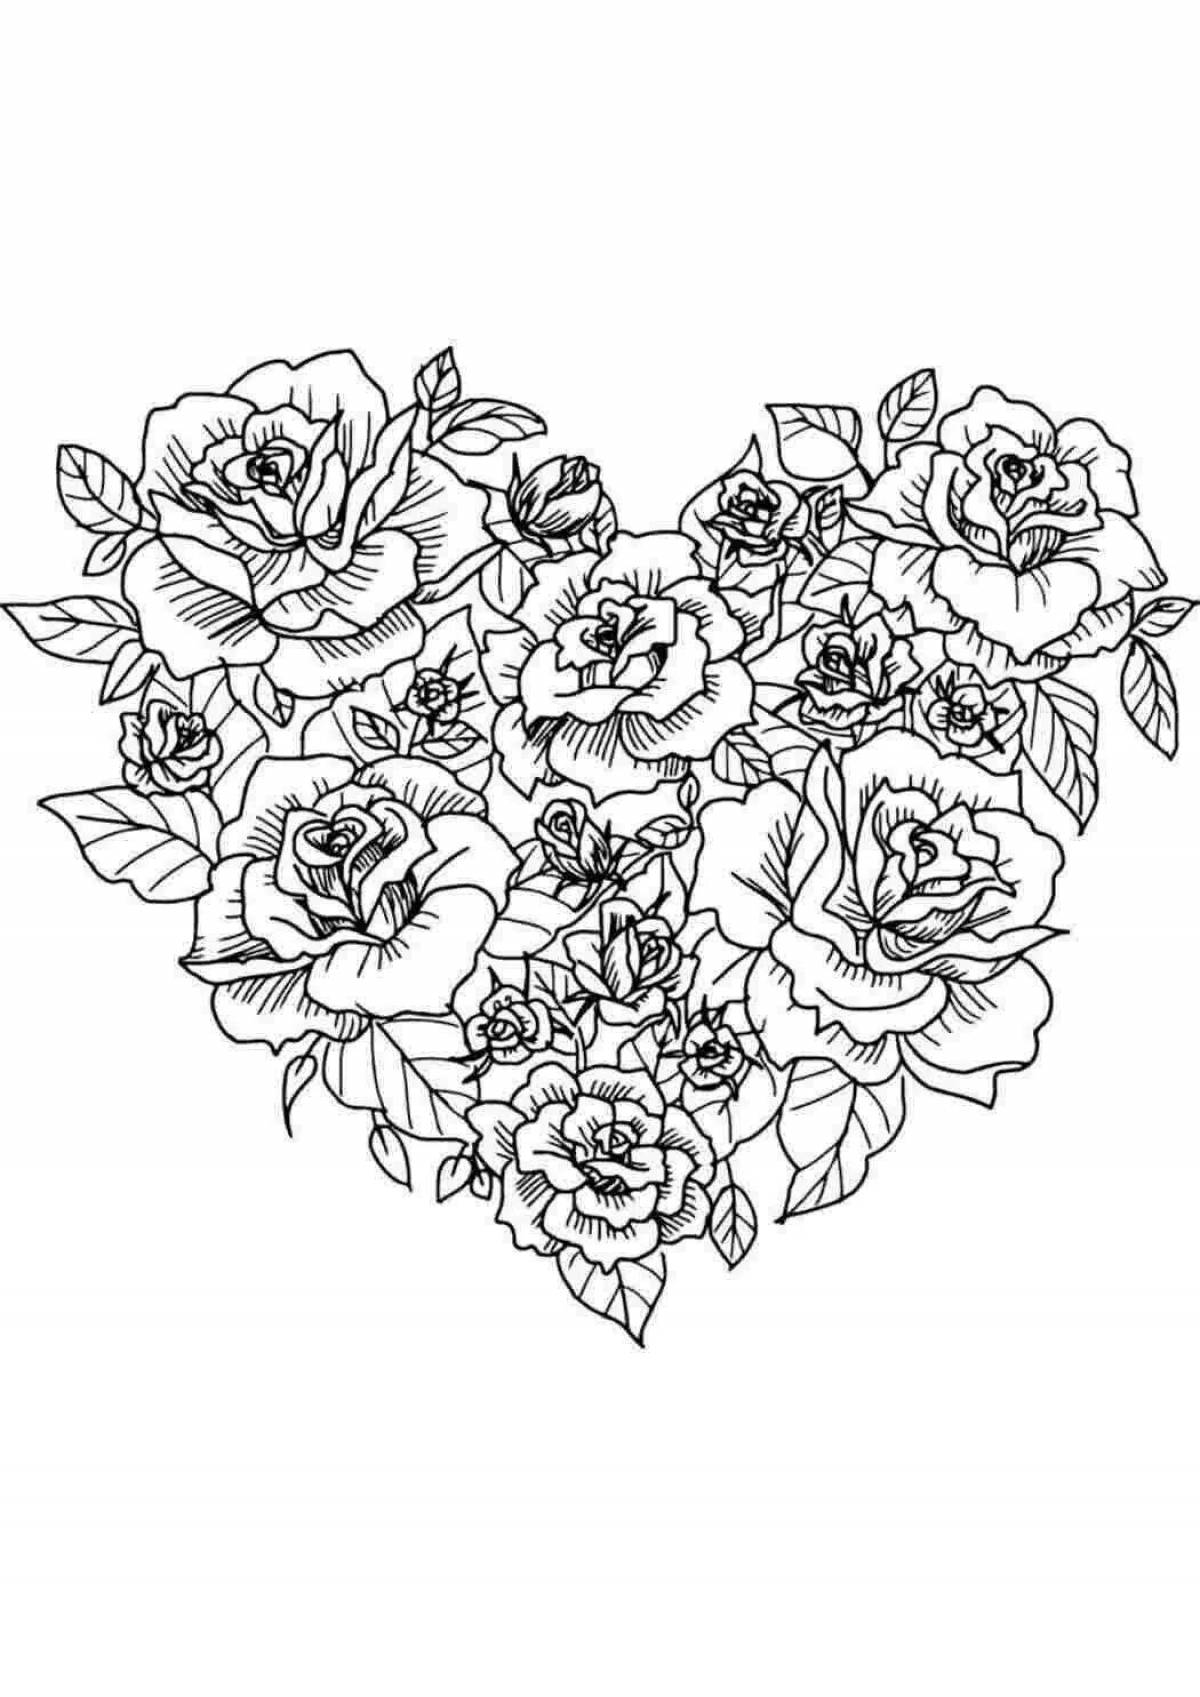 Delightful coloring pages March 8 flowers